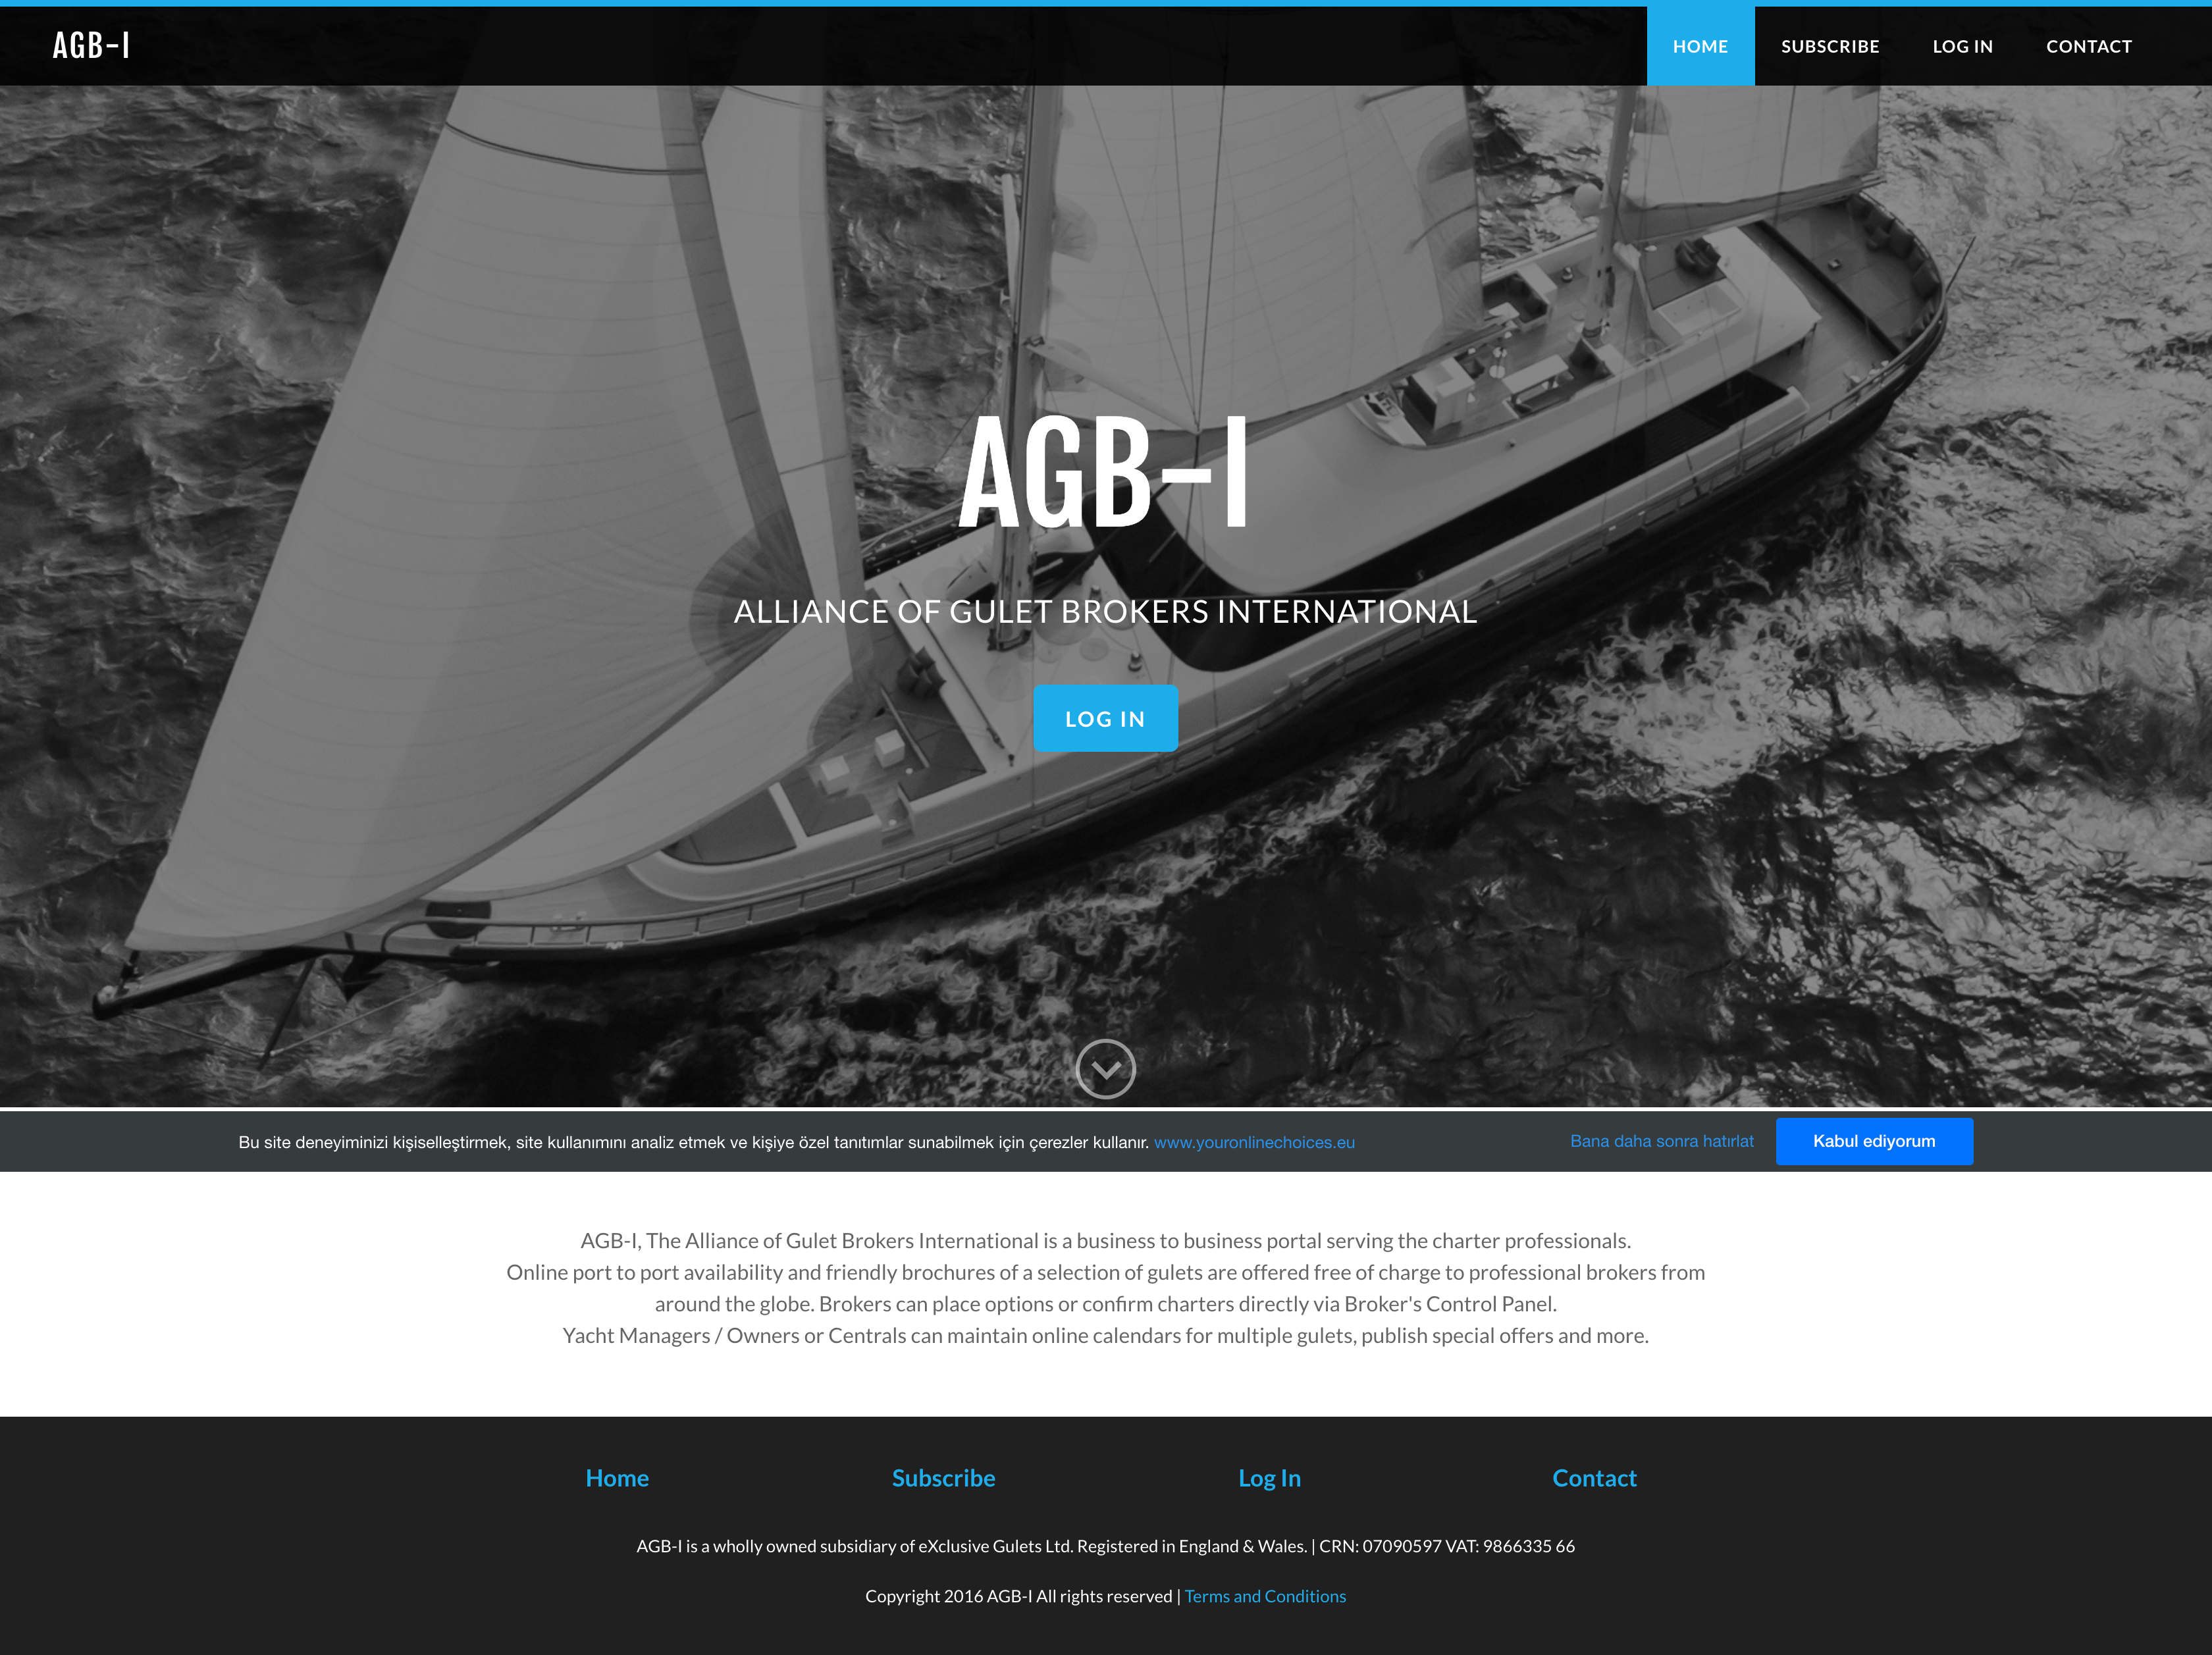 agb-i.com, php project